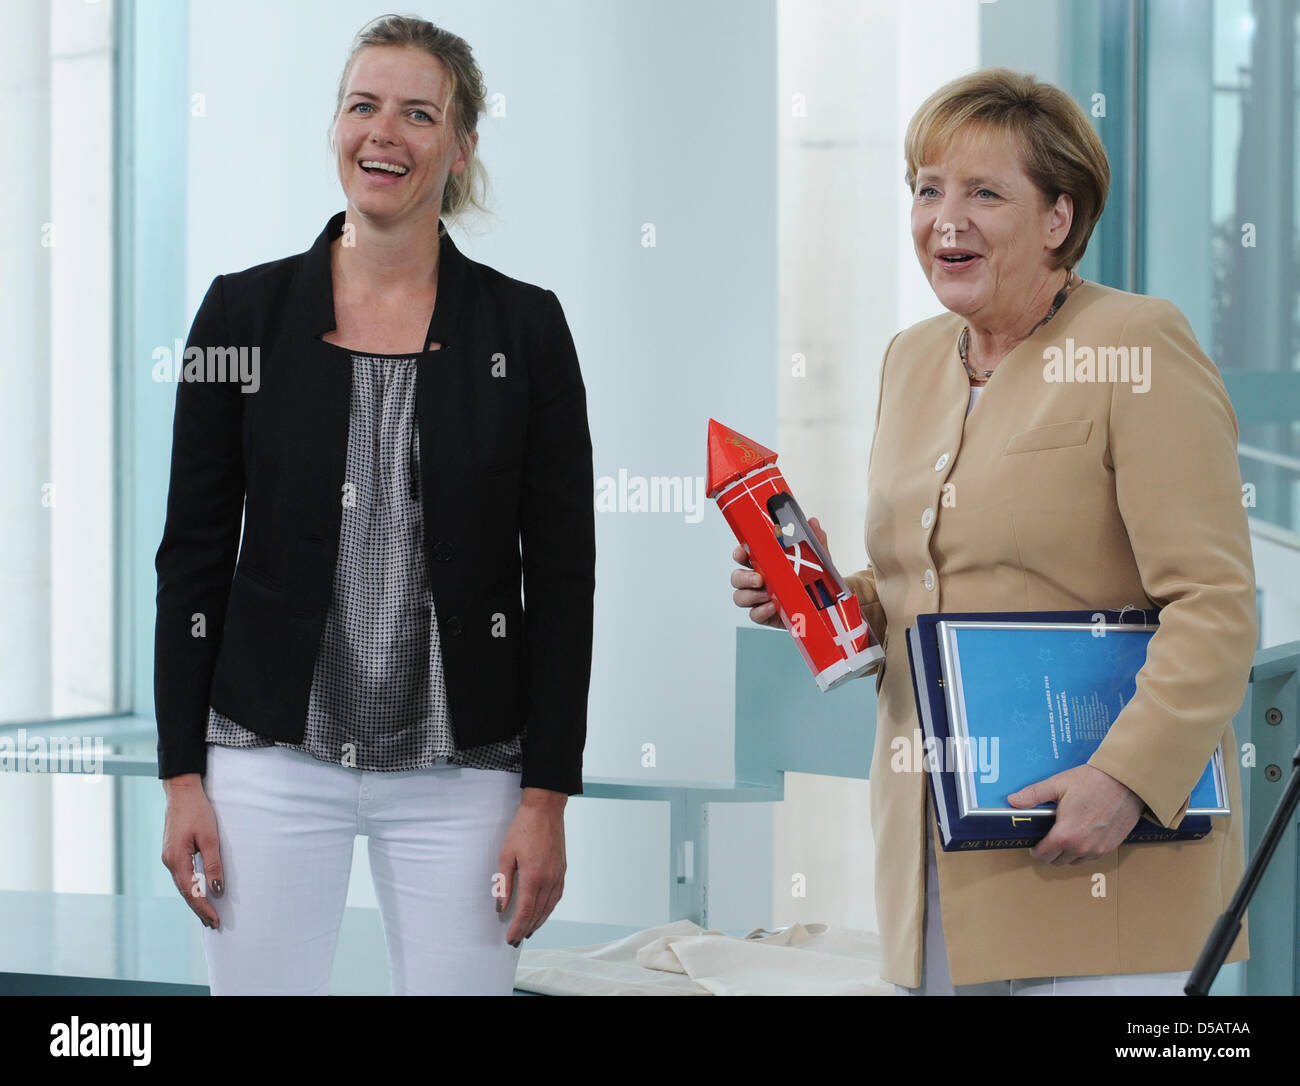 Ellen Trane Norby (L), vice-chairwoman of Danish European Movement, chats  with German Chancellor Angela Merkel (R), who was awarded 'European of the  Year 2010' in Berlin, Germany, 13 July 2010. The award